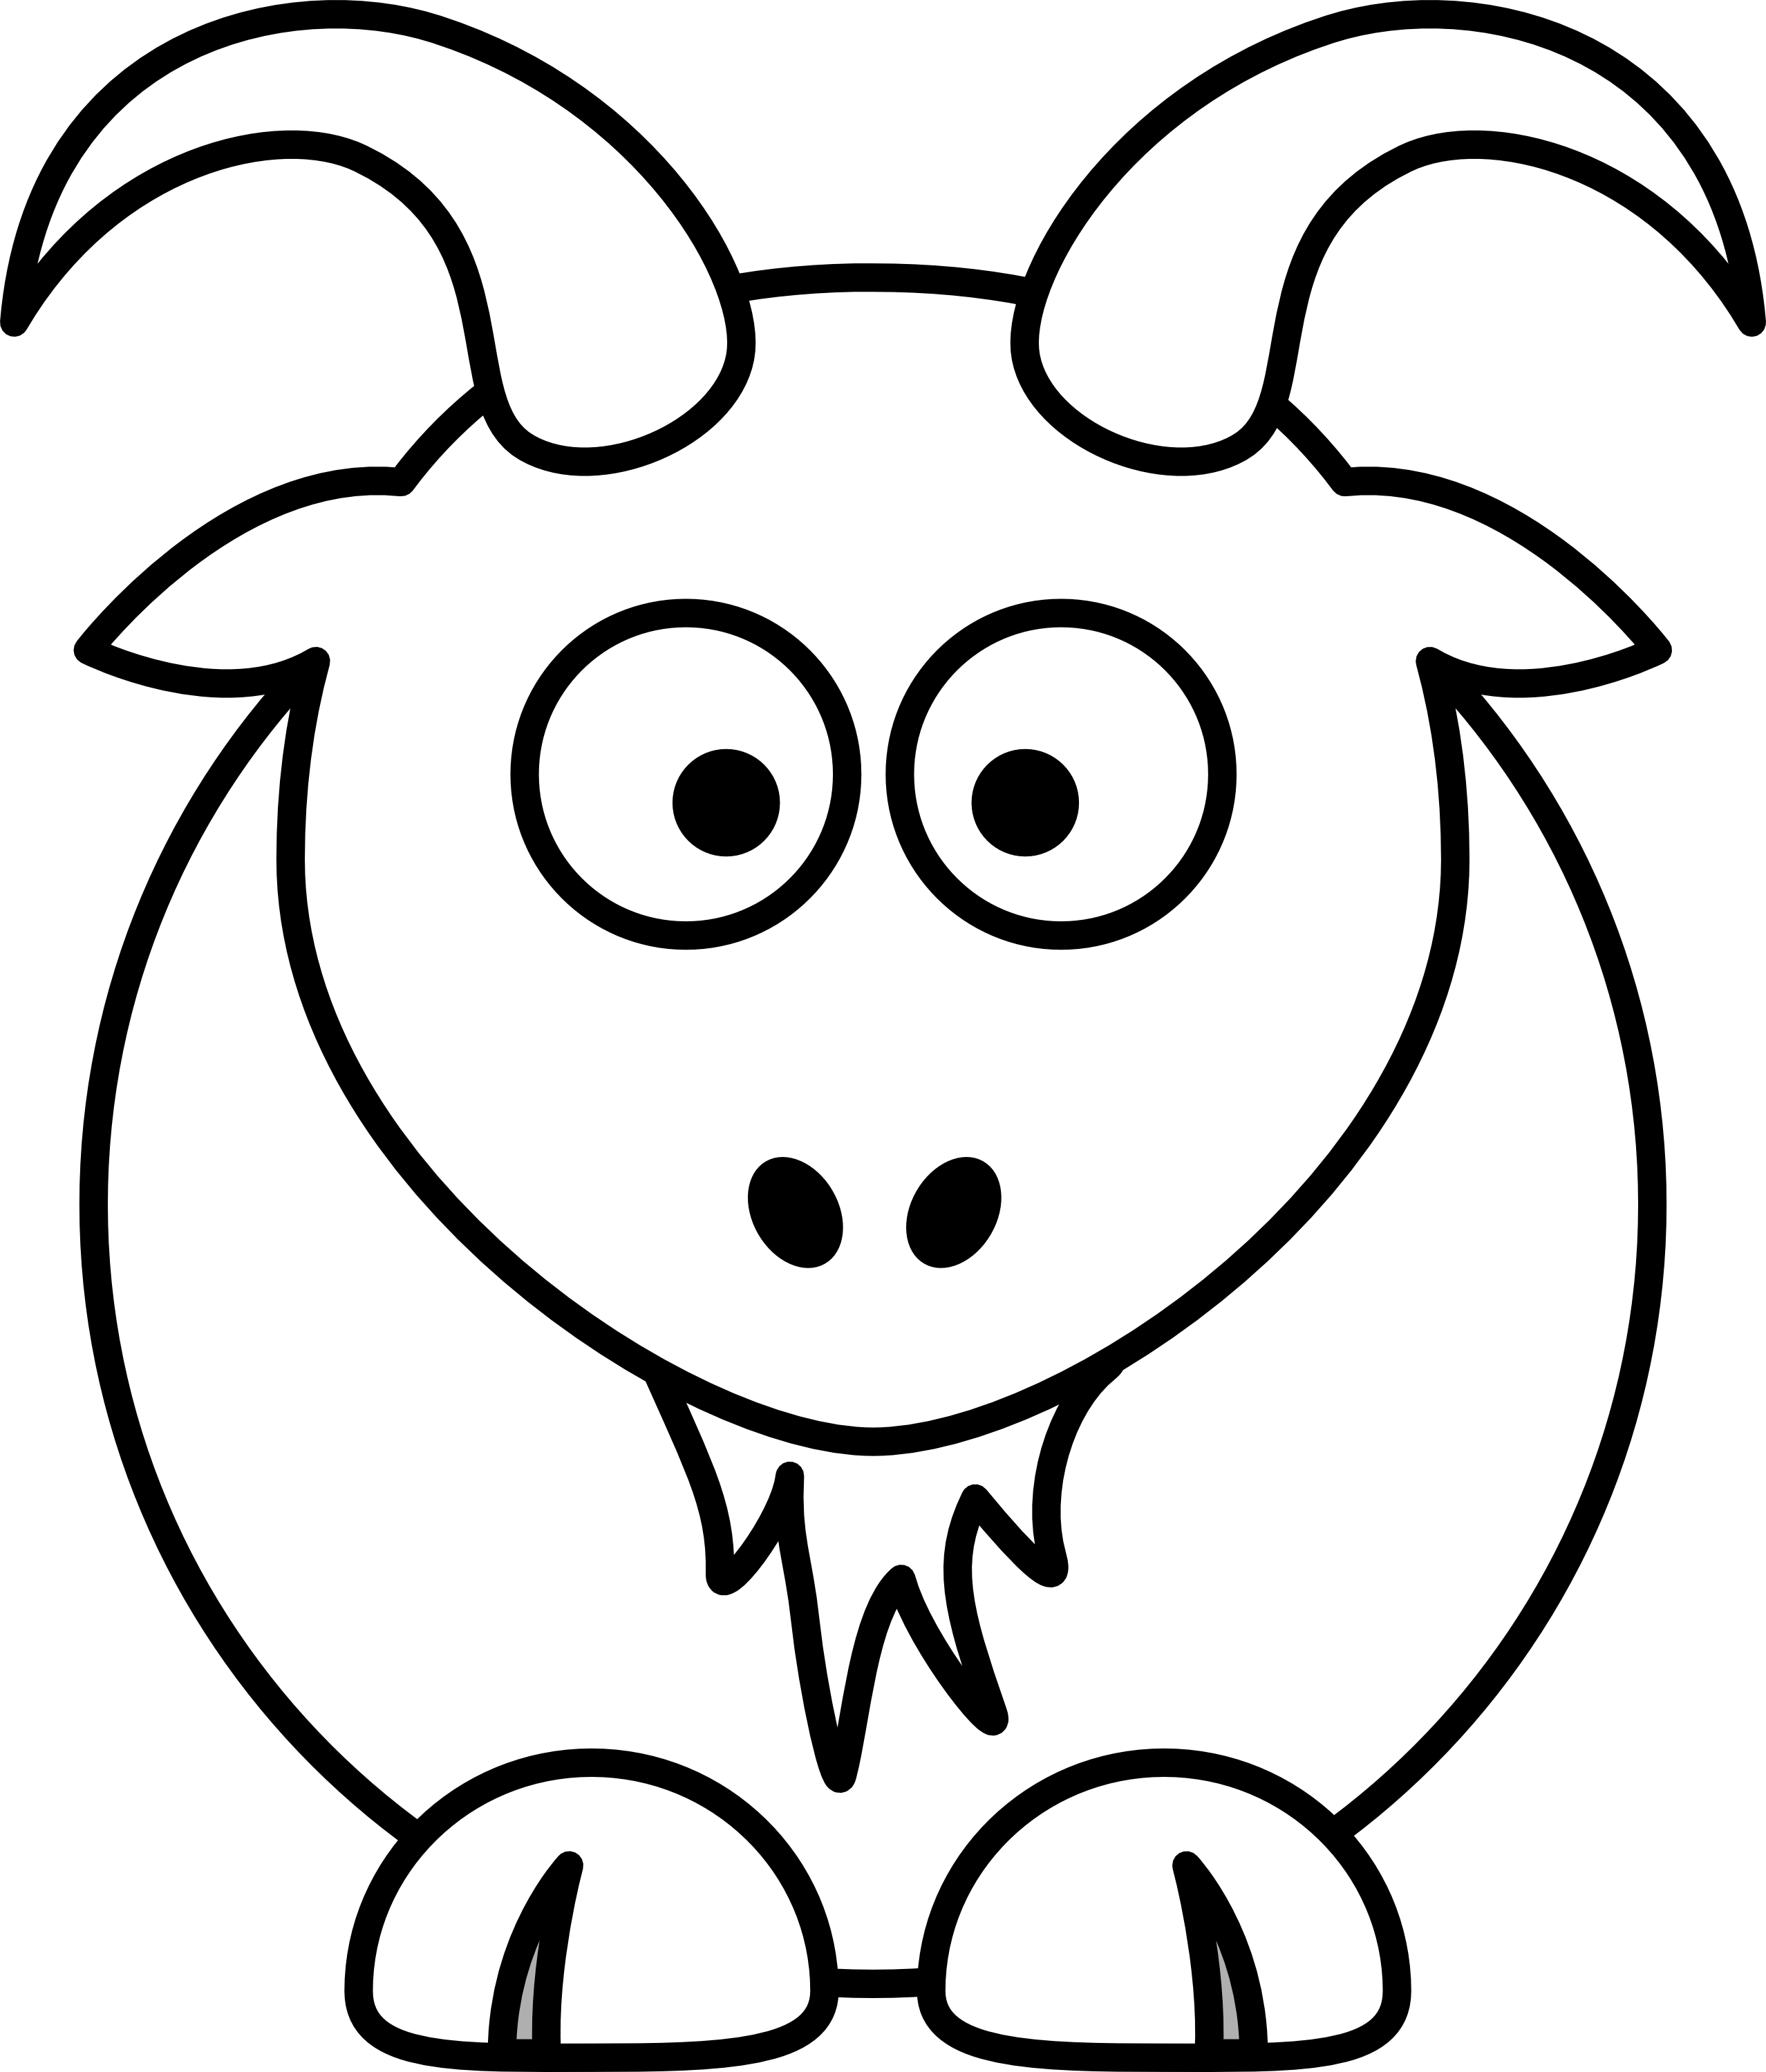 Black and white animal clipart